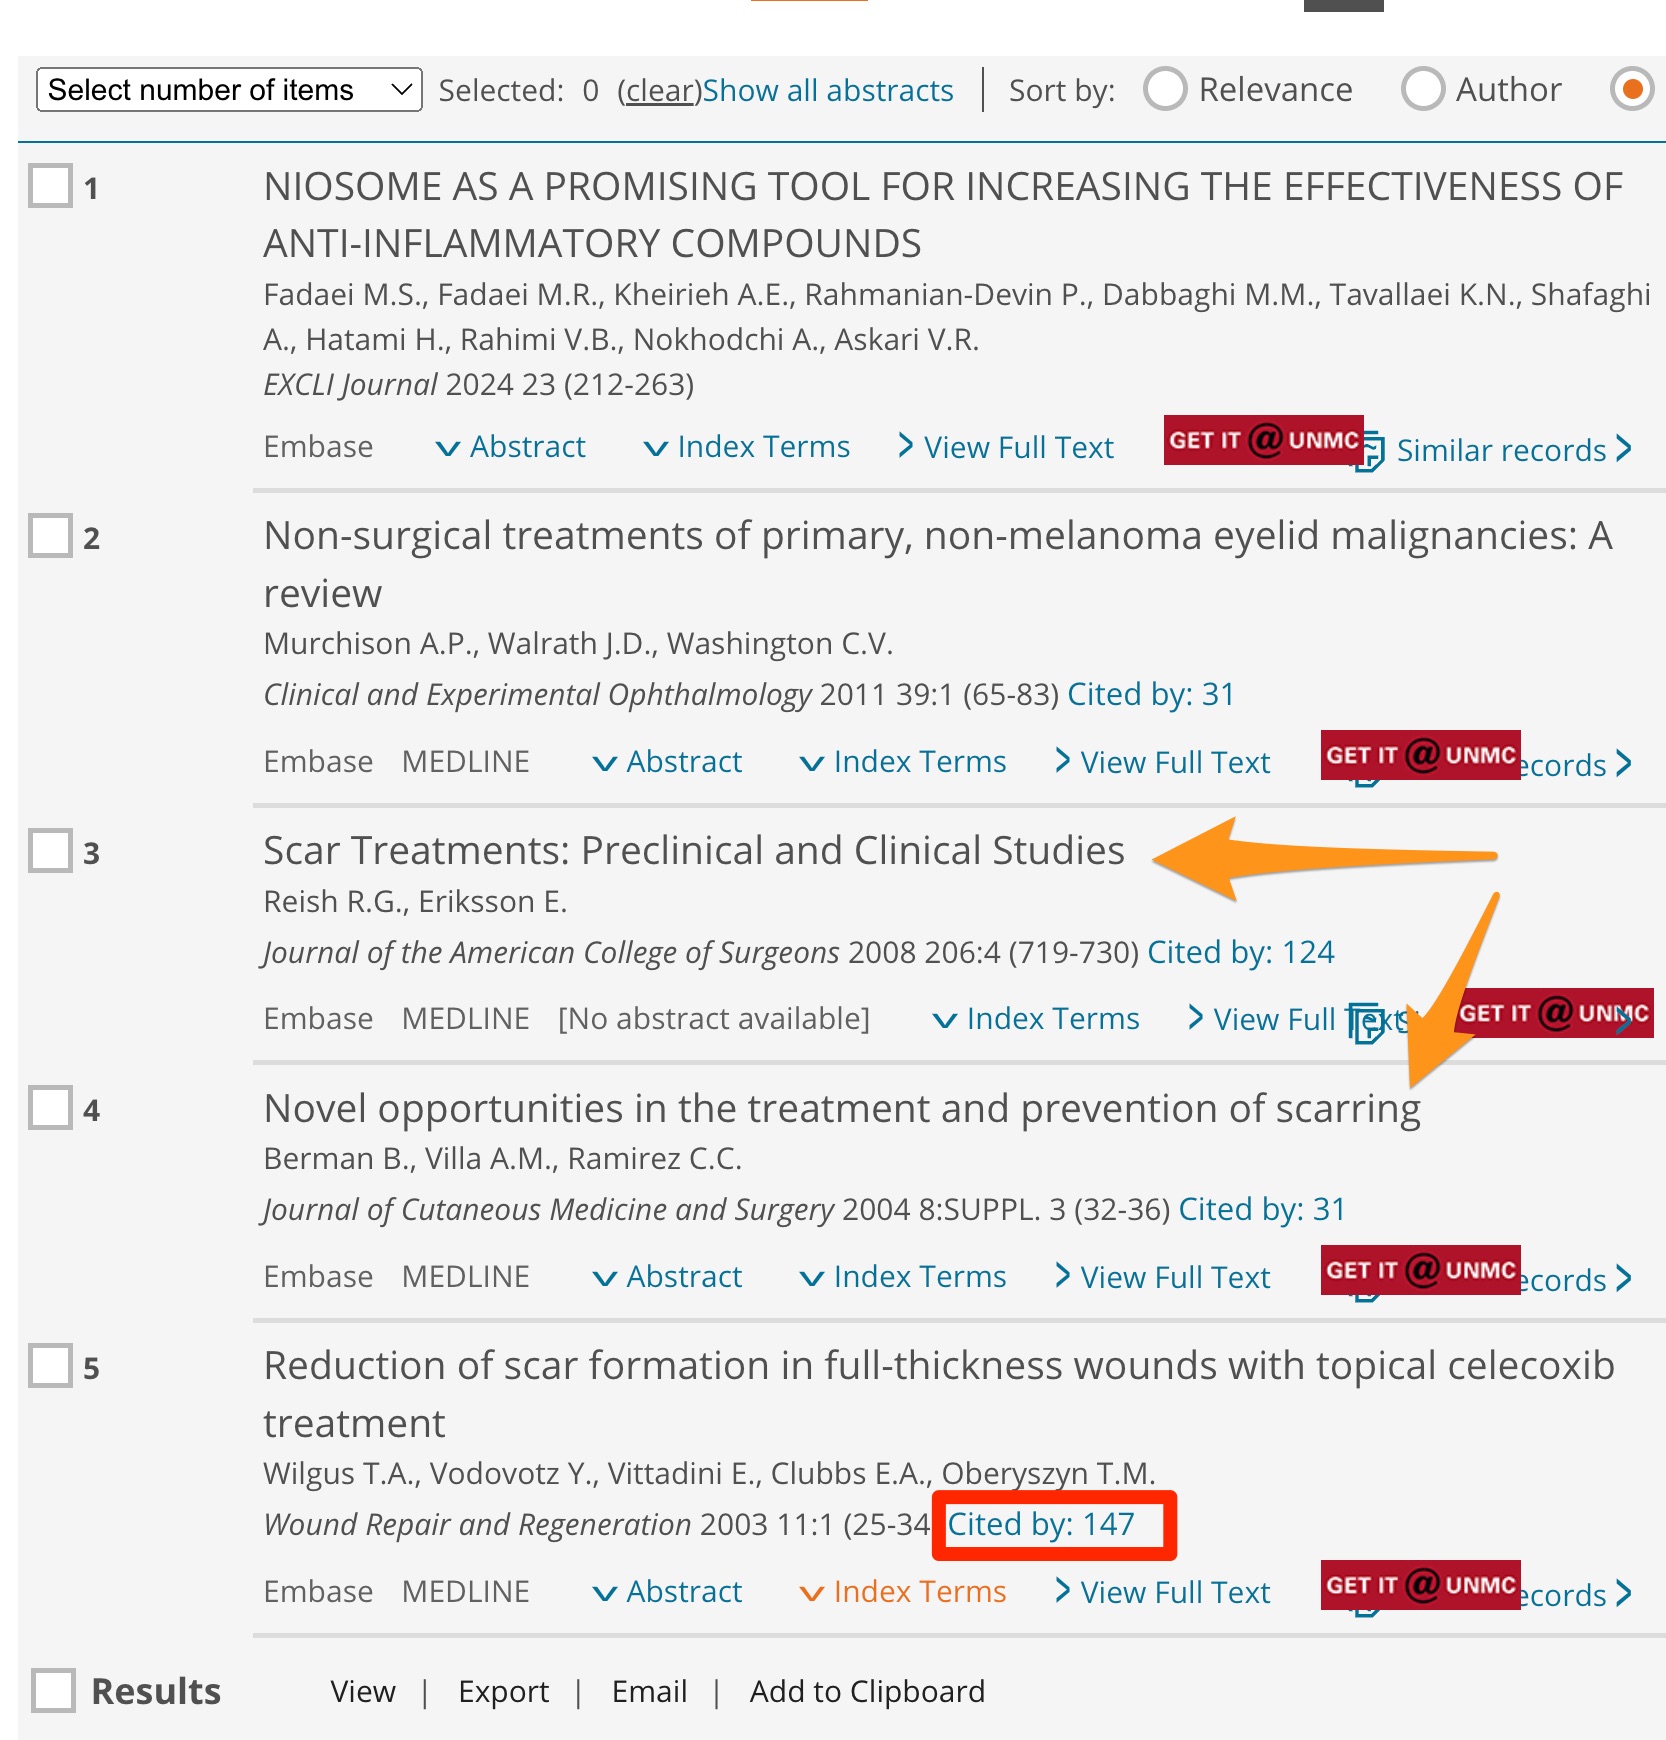 Screenshot showing the 4 results of the EMBASE search. Orange arrow point to 3 and 4. Red arrow points to #5.